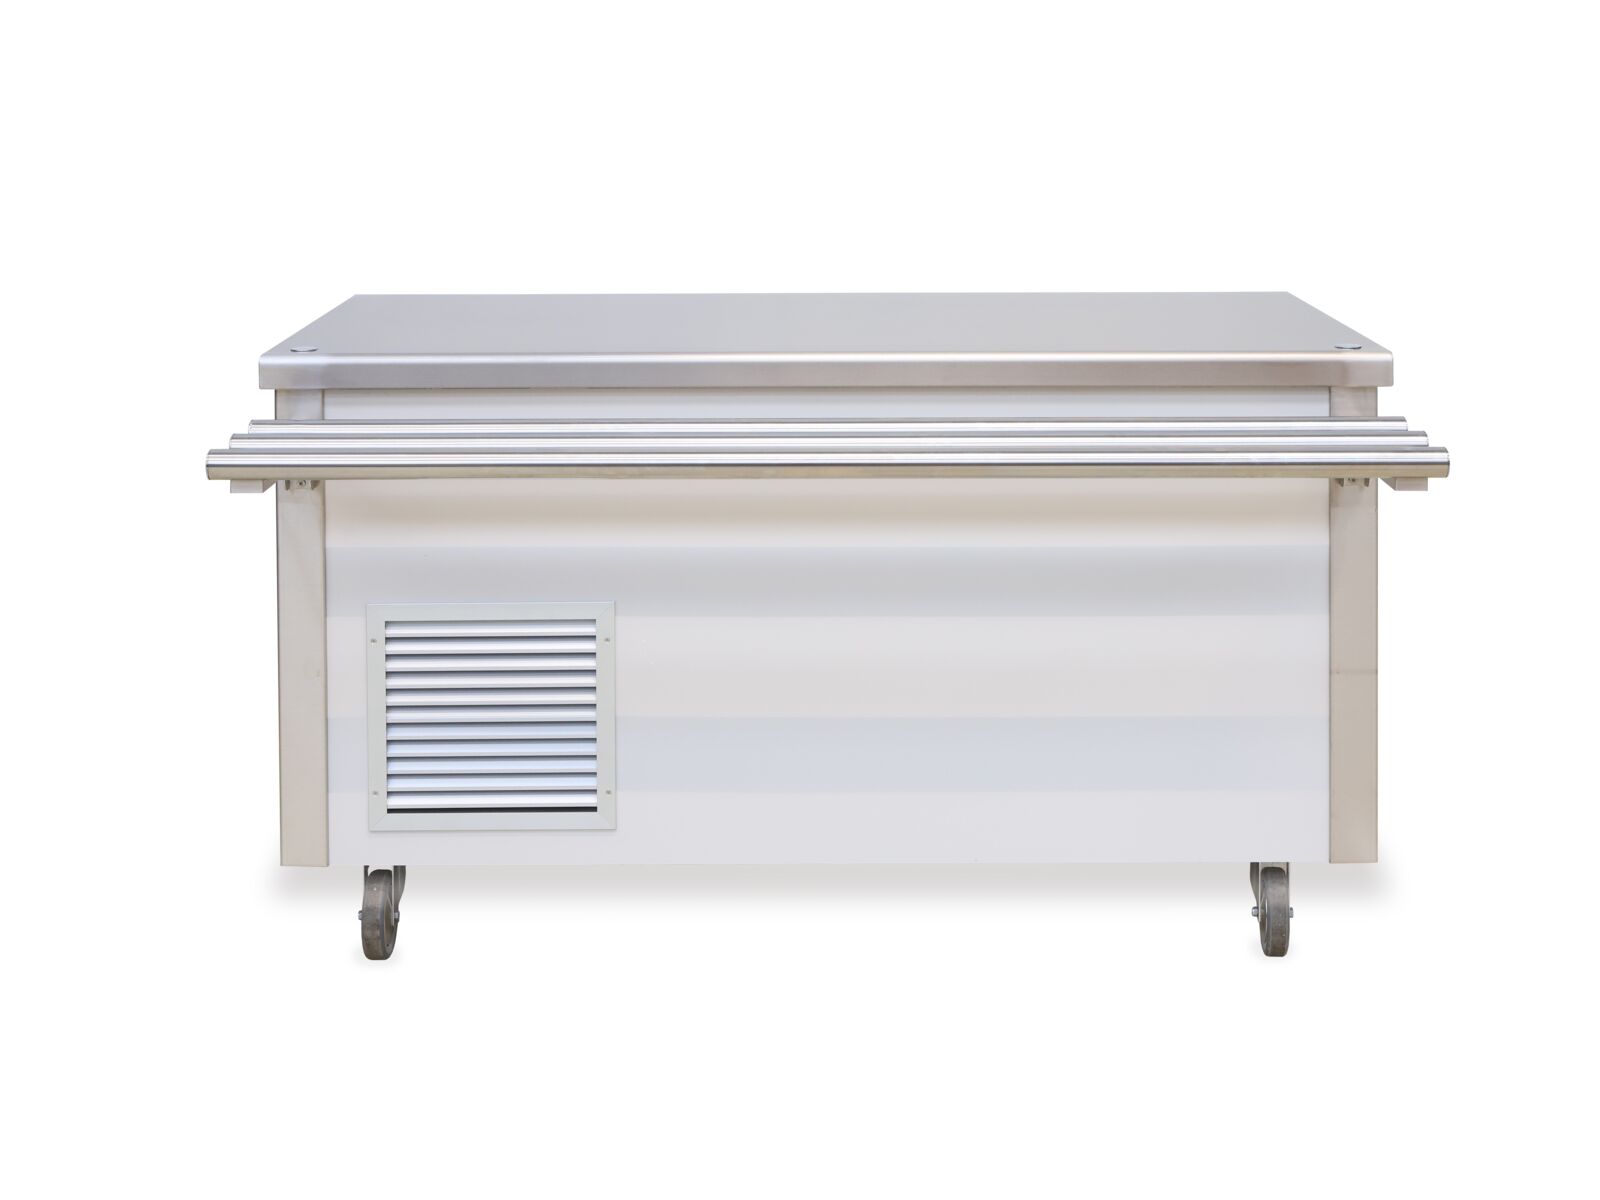 Service counter neutral with undercooling 3kW 230V